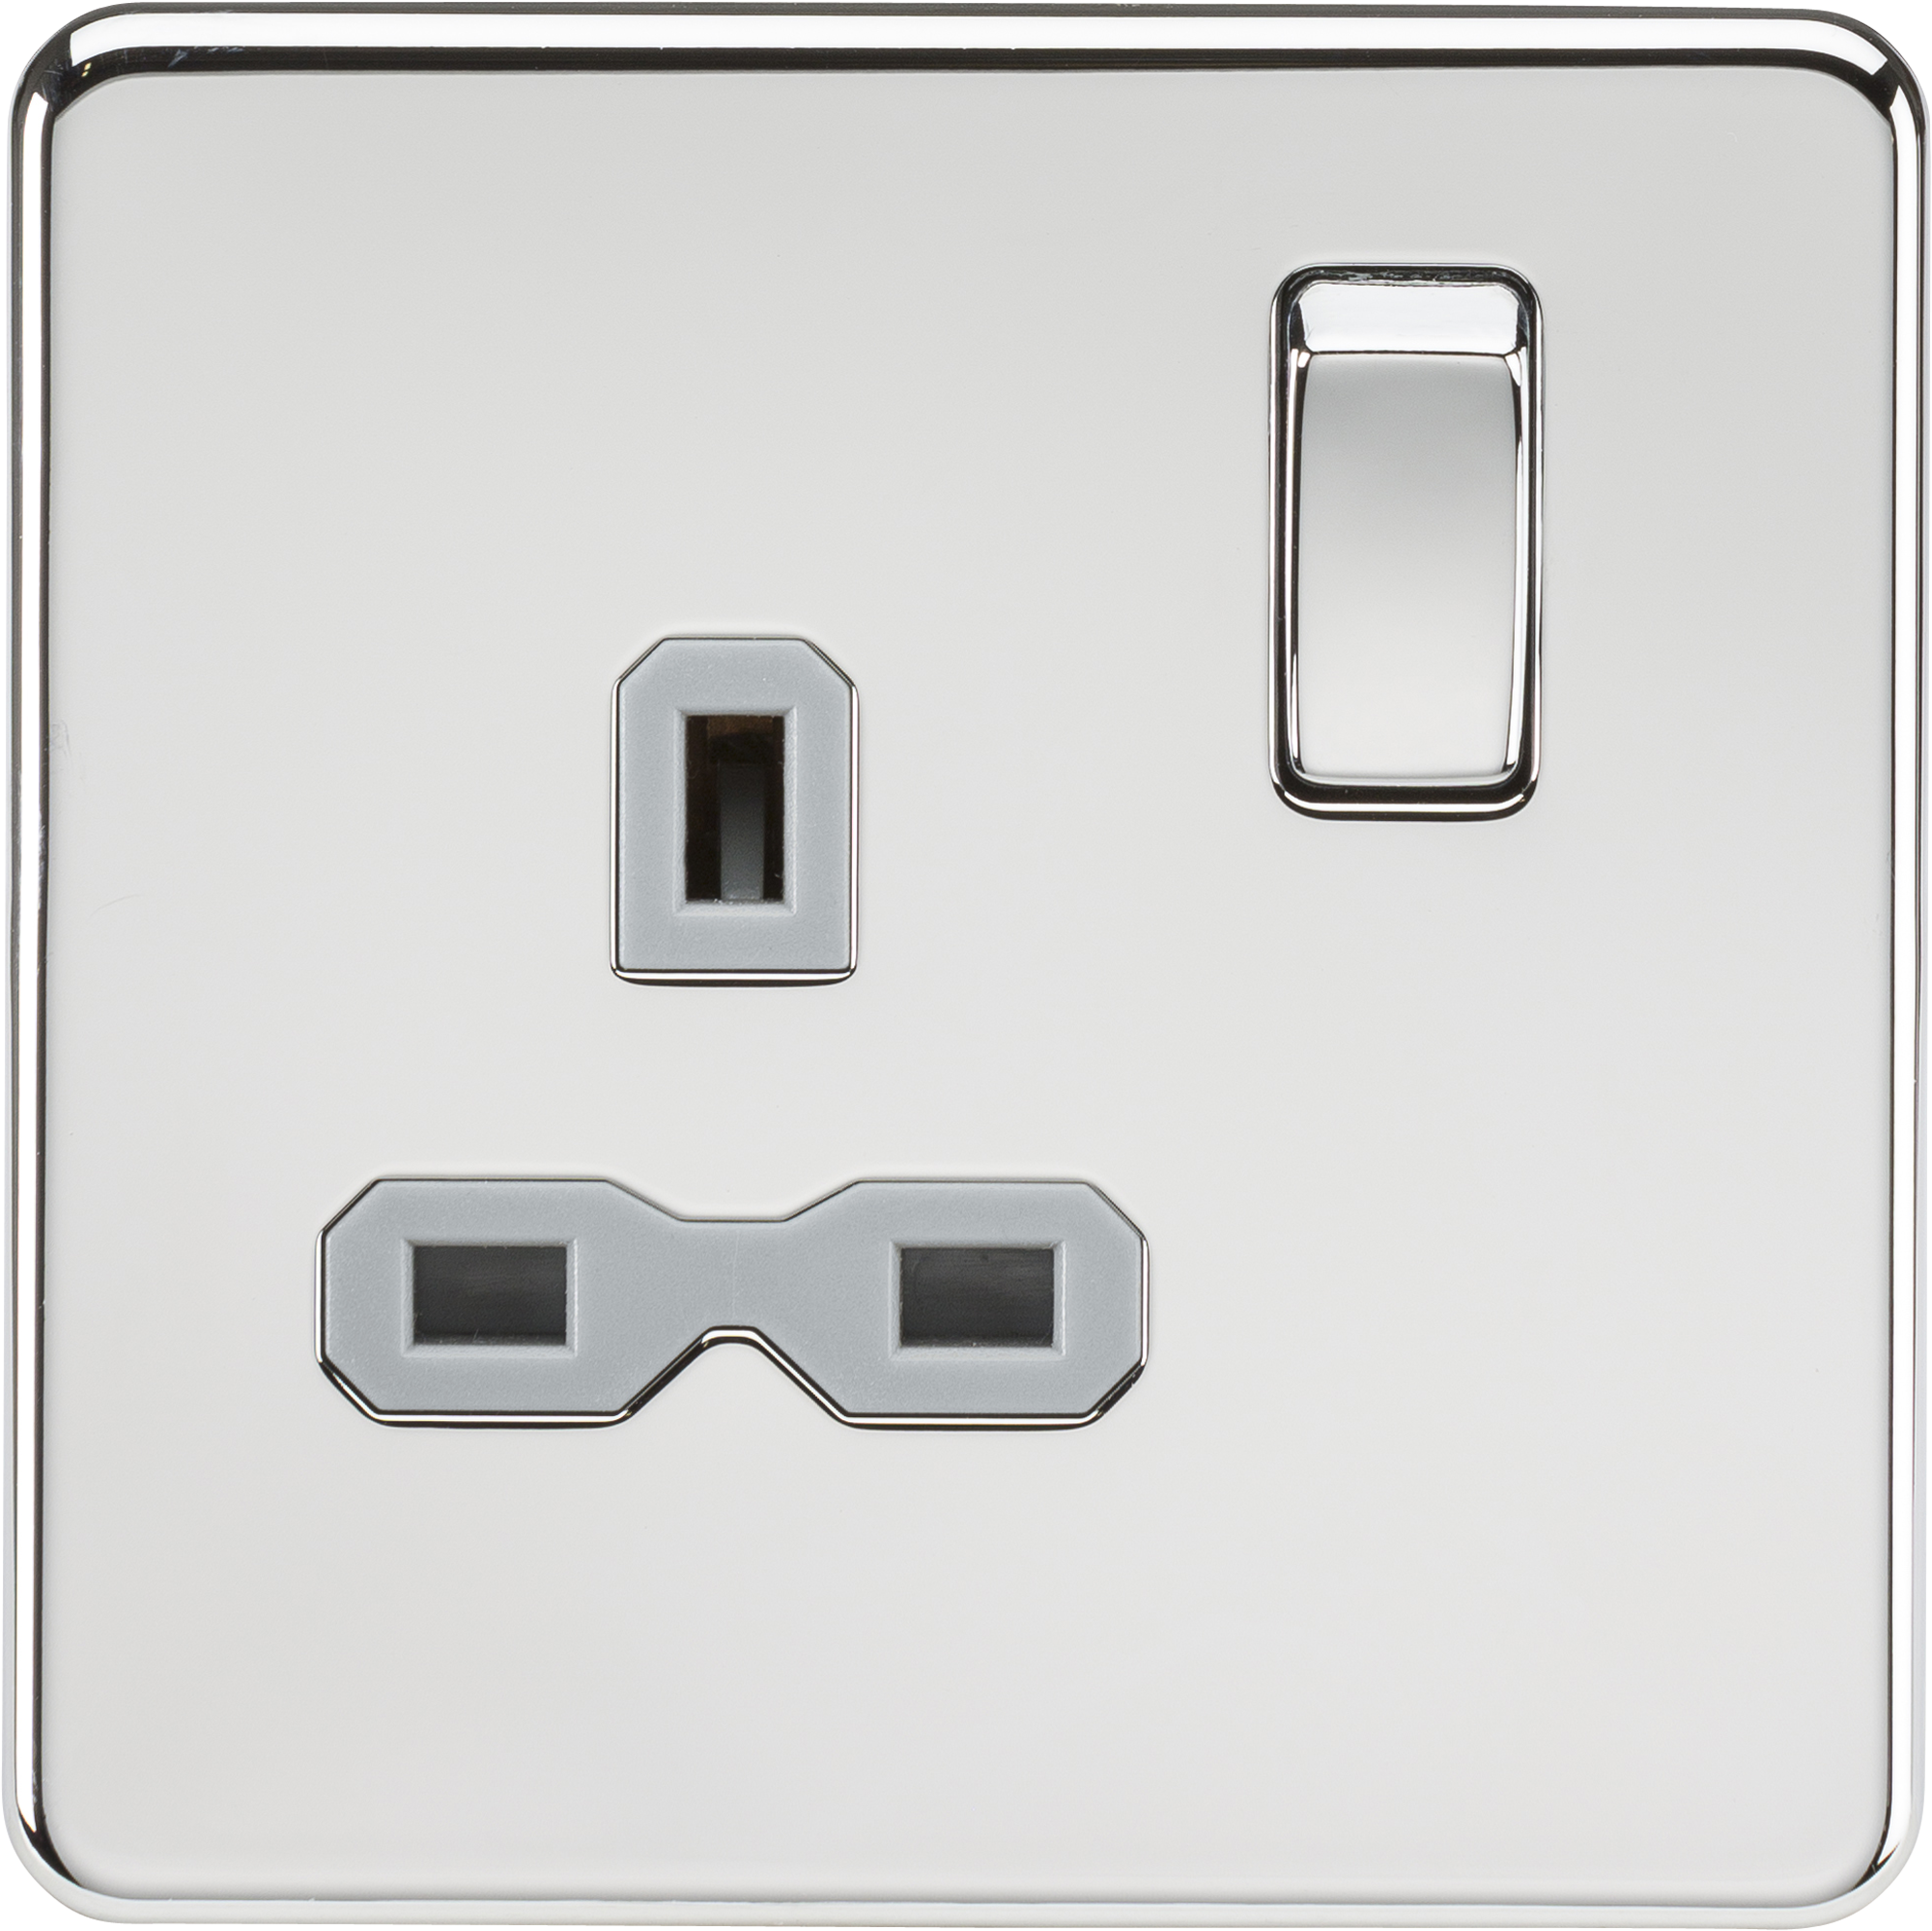 Screwless 13A 1G DP Switched Socket - Polished Chrome With Grey Insert - SFR7000PCG 